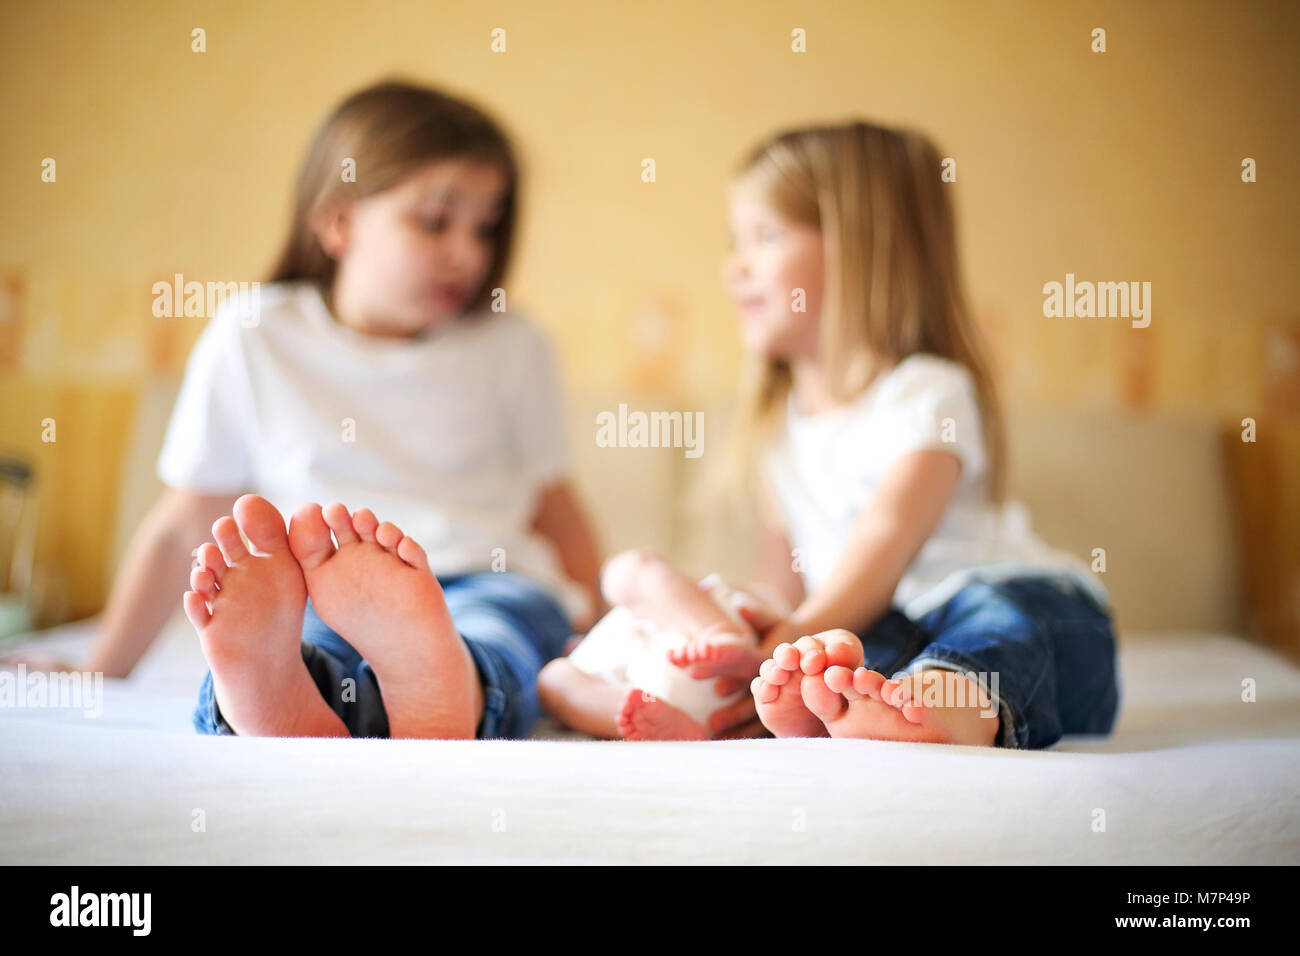 Sweet family in bed. Three sisters, close up on feet. Love and happiness concept Stock Photo